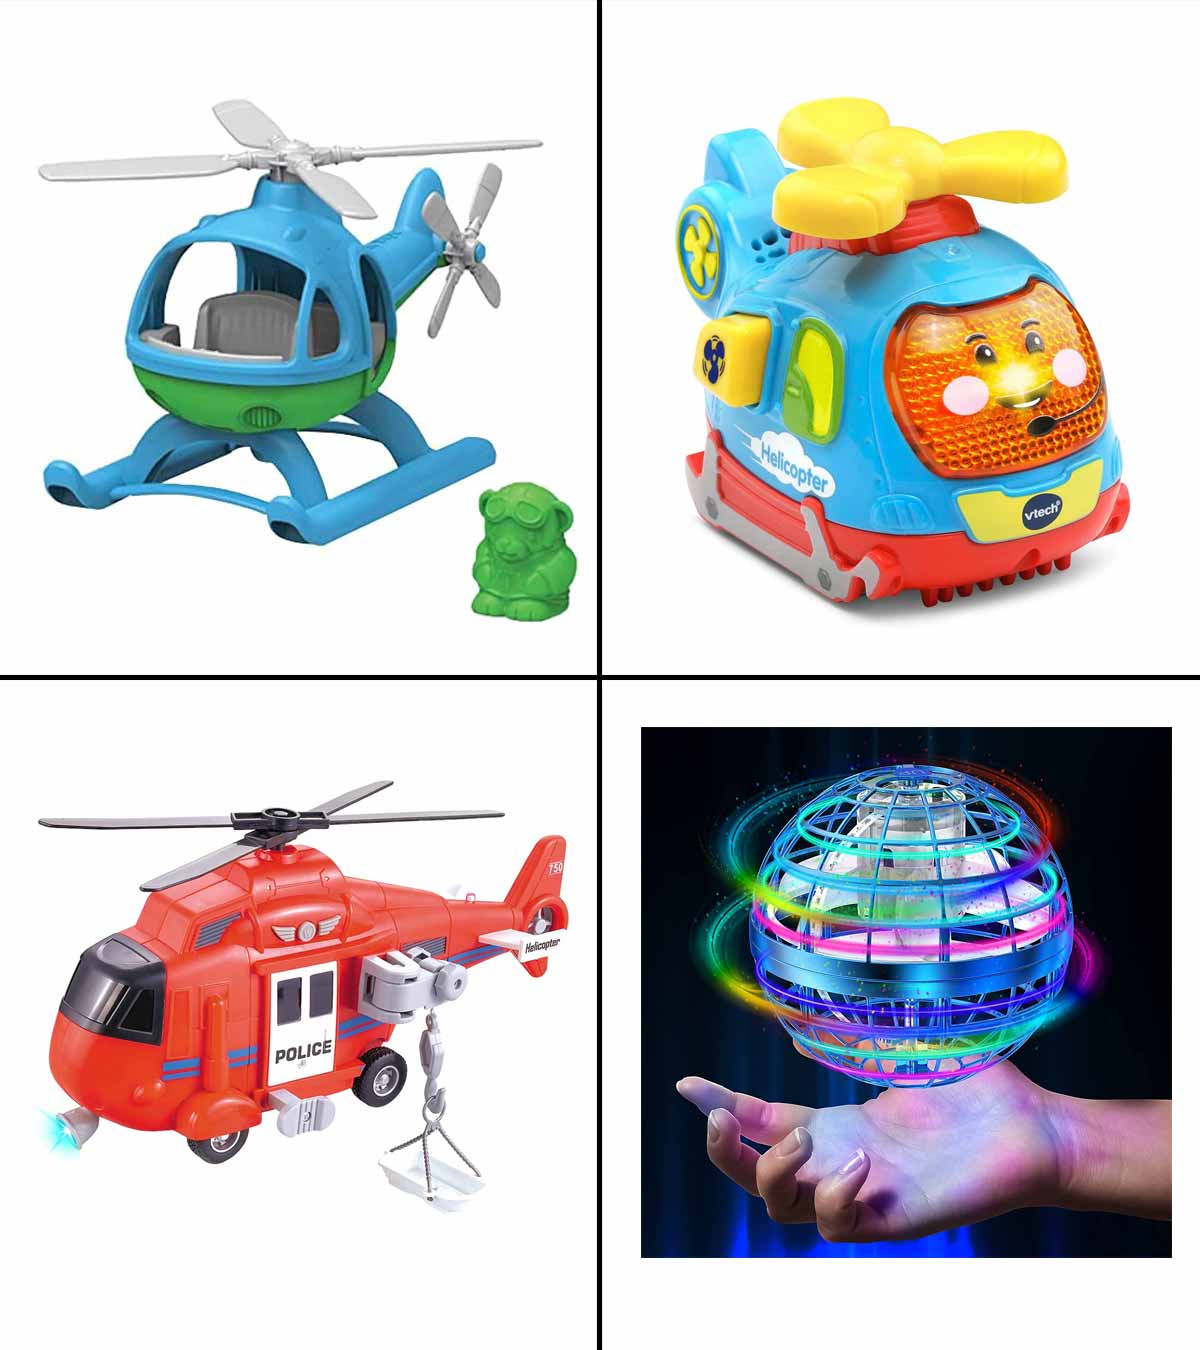 24 Piece Helicopters Toy with LED Lights for Kids,12 Slingshot Helicopters 12 LED Helicopters,Amazing Arrow Helicopter Glow in The Dark Party Supplies for Kids 